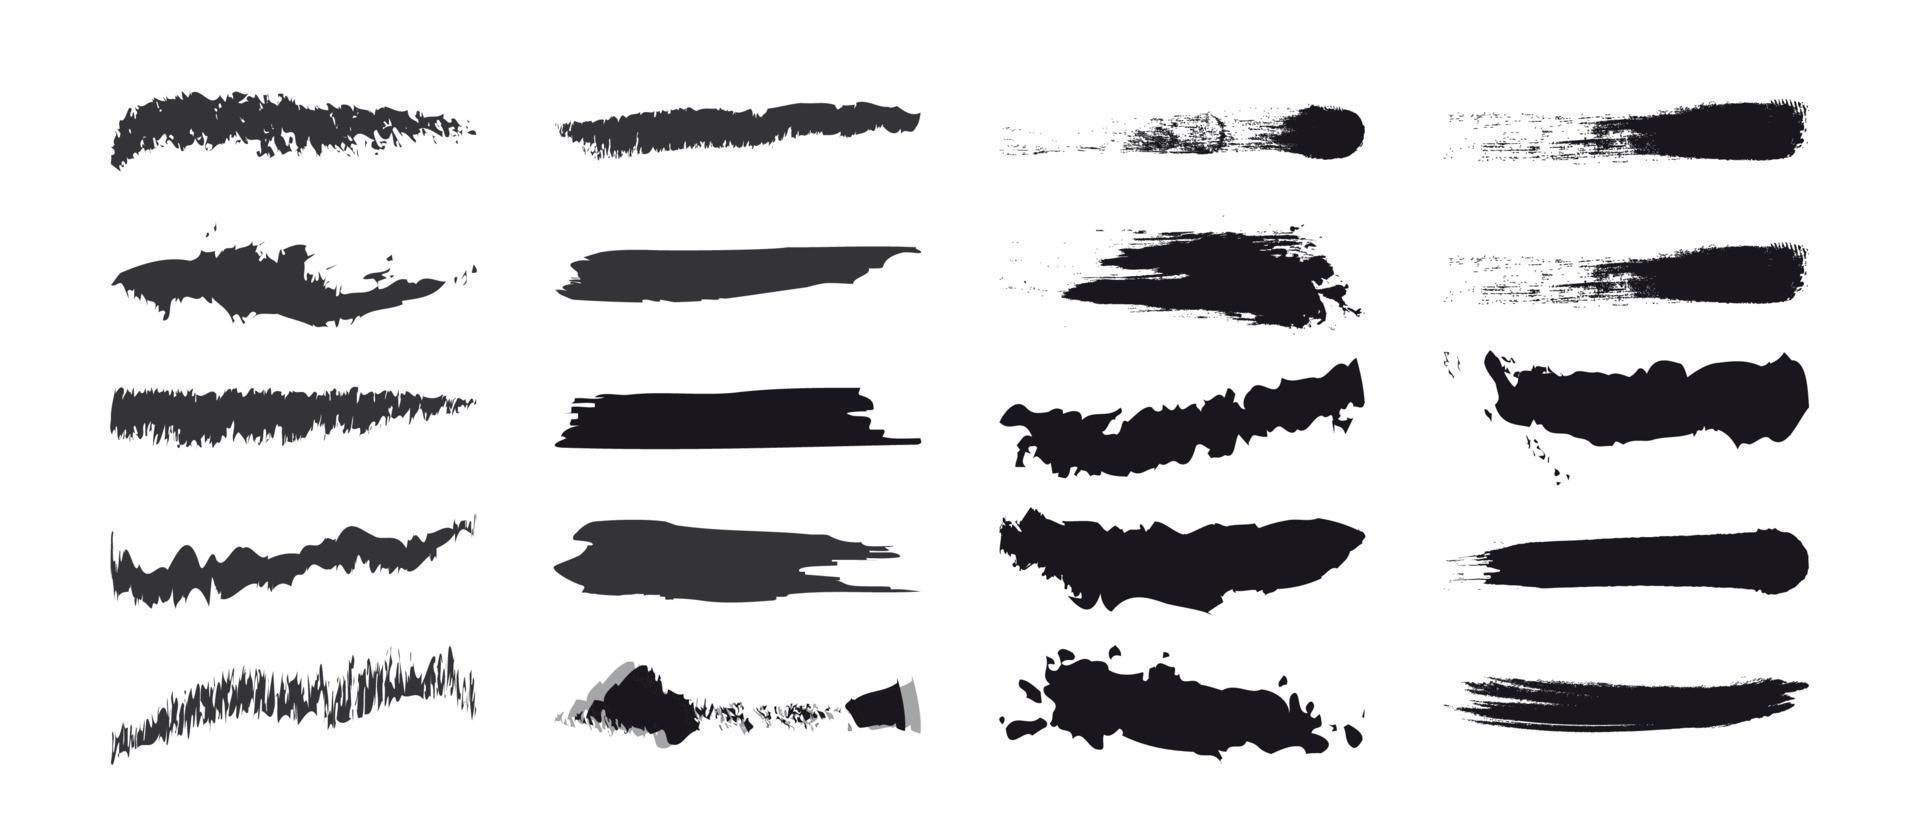 Painting brushes and ink brushes, black paint, dirty, backdrop set flat vector illustration.